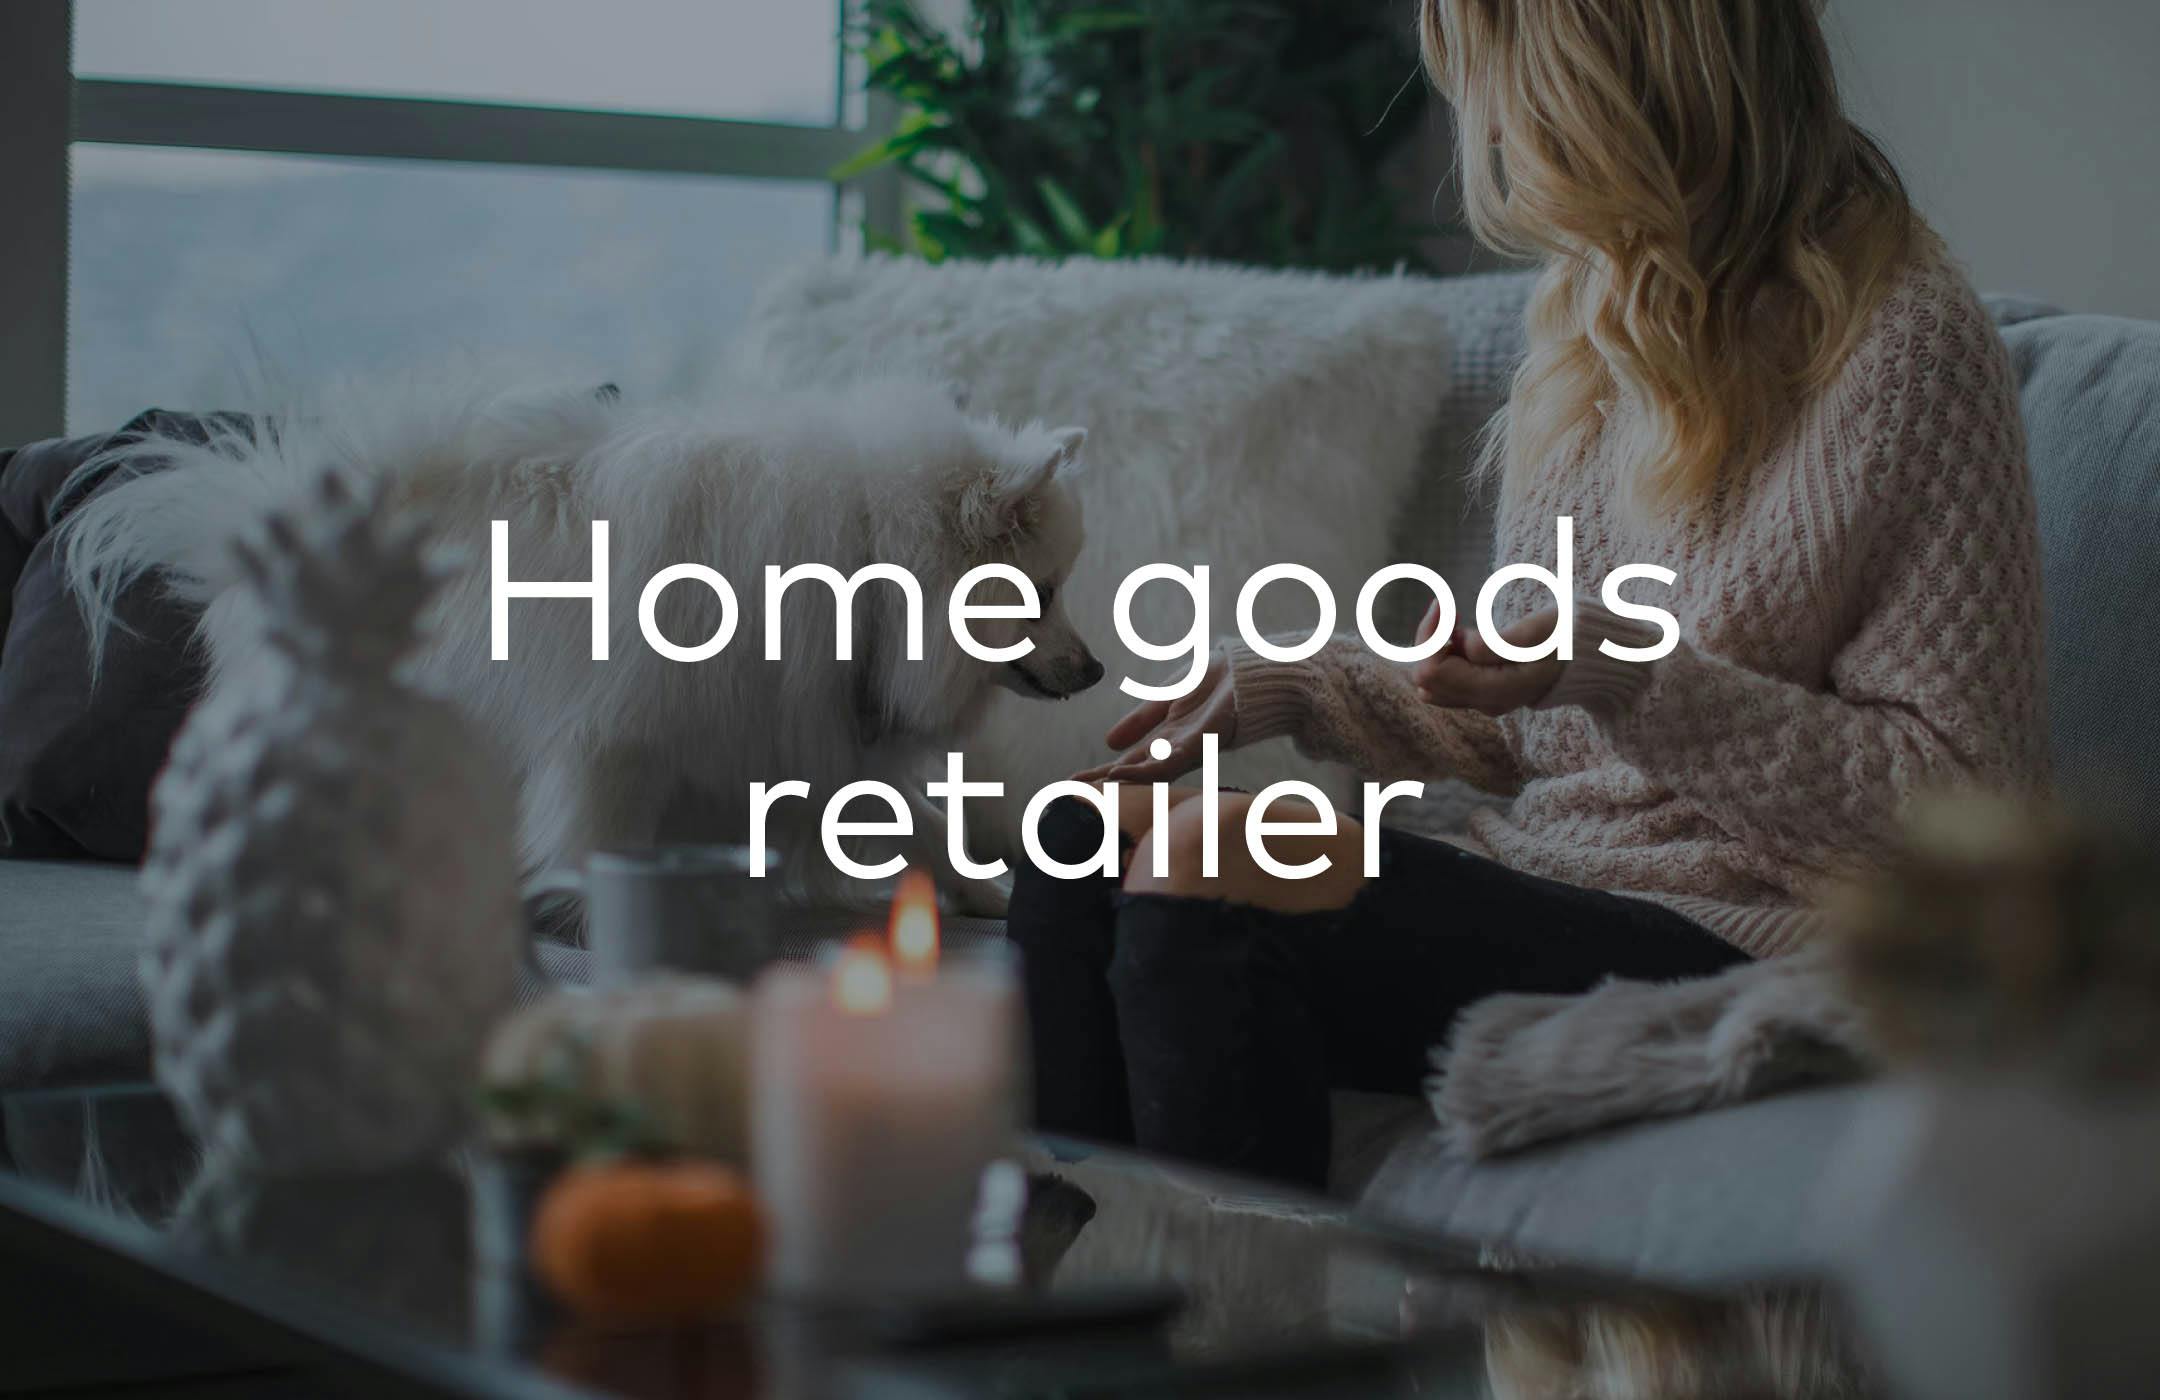 Image of woman on her couch, with text: Home goods retailer